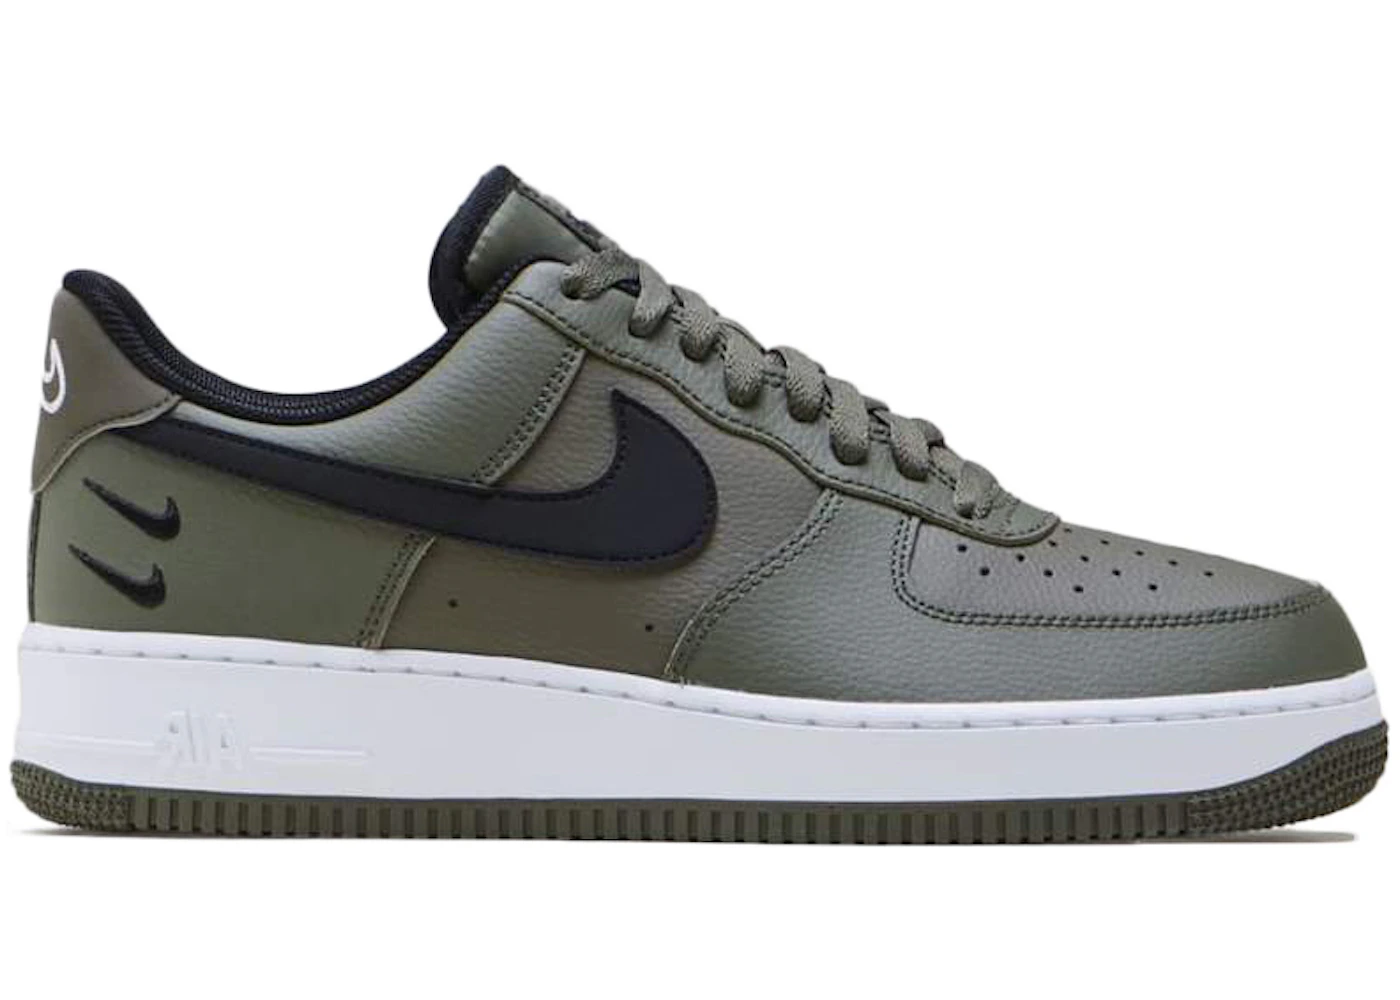 Nike Air Force 1 Low '07 Olive Black Double Swoosh Men's - CT2300-300 - GB